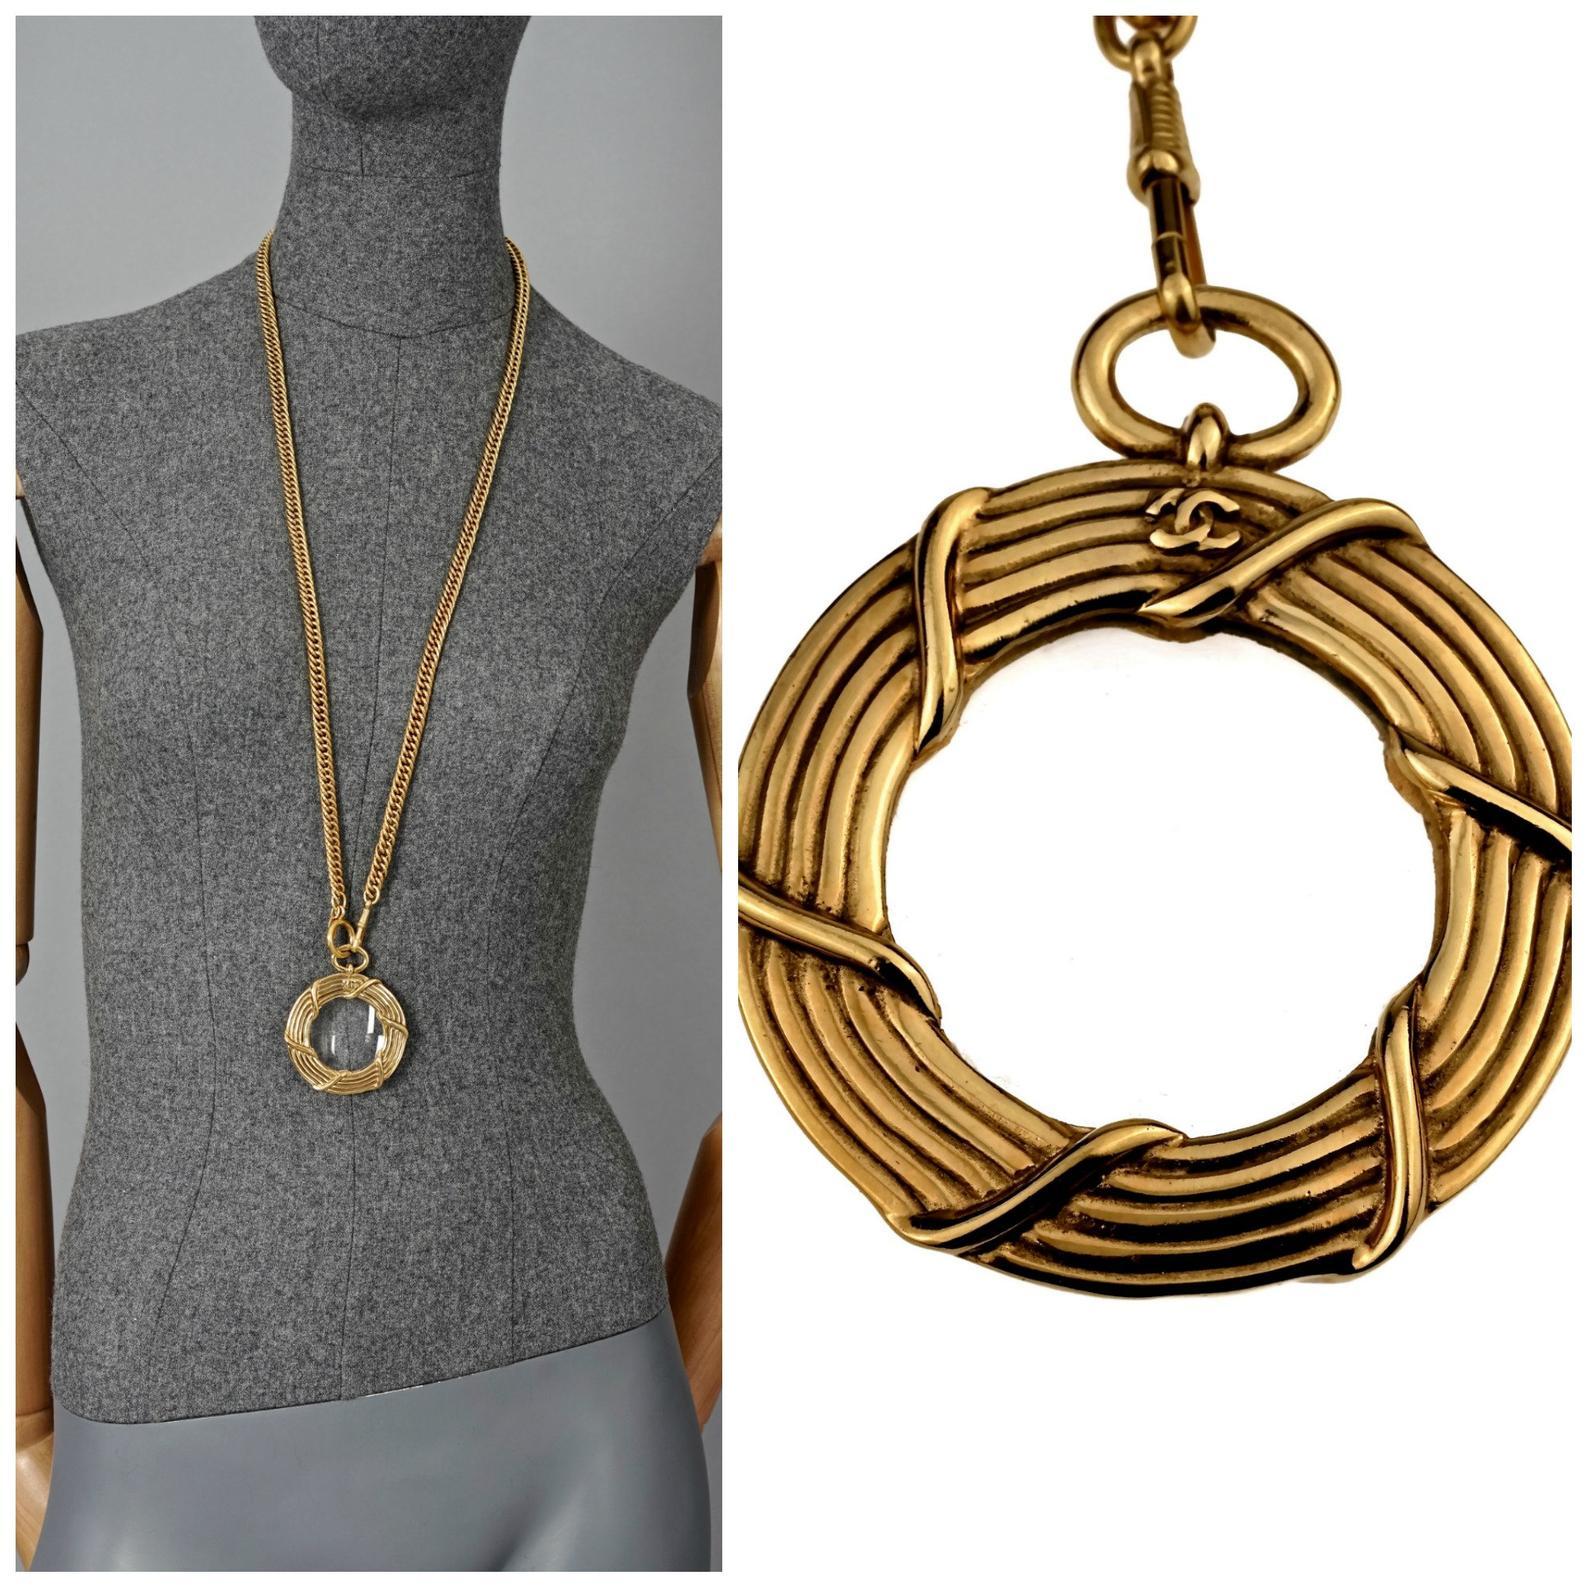 Vintage CHANEL Logo Magnifying Glass Chain Necklace

Measurements:
Pendant: 2.16 inches (5.5 cm)
Chain Length: 37.79 inches (96 cm)

Features:
- 100% Authentic CHANEL.
- Chunky chain with magnifying glass pendant.
- Pendant ribbed pattern with CC